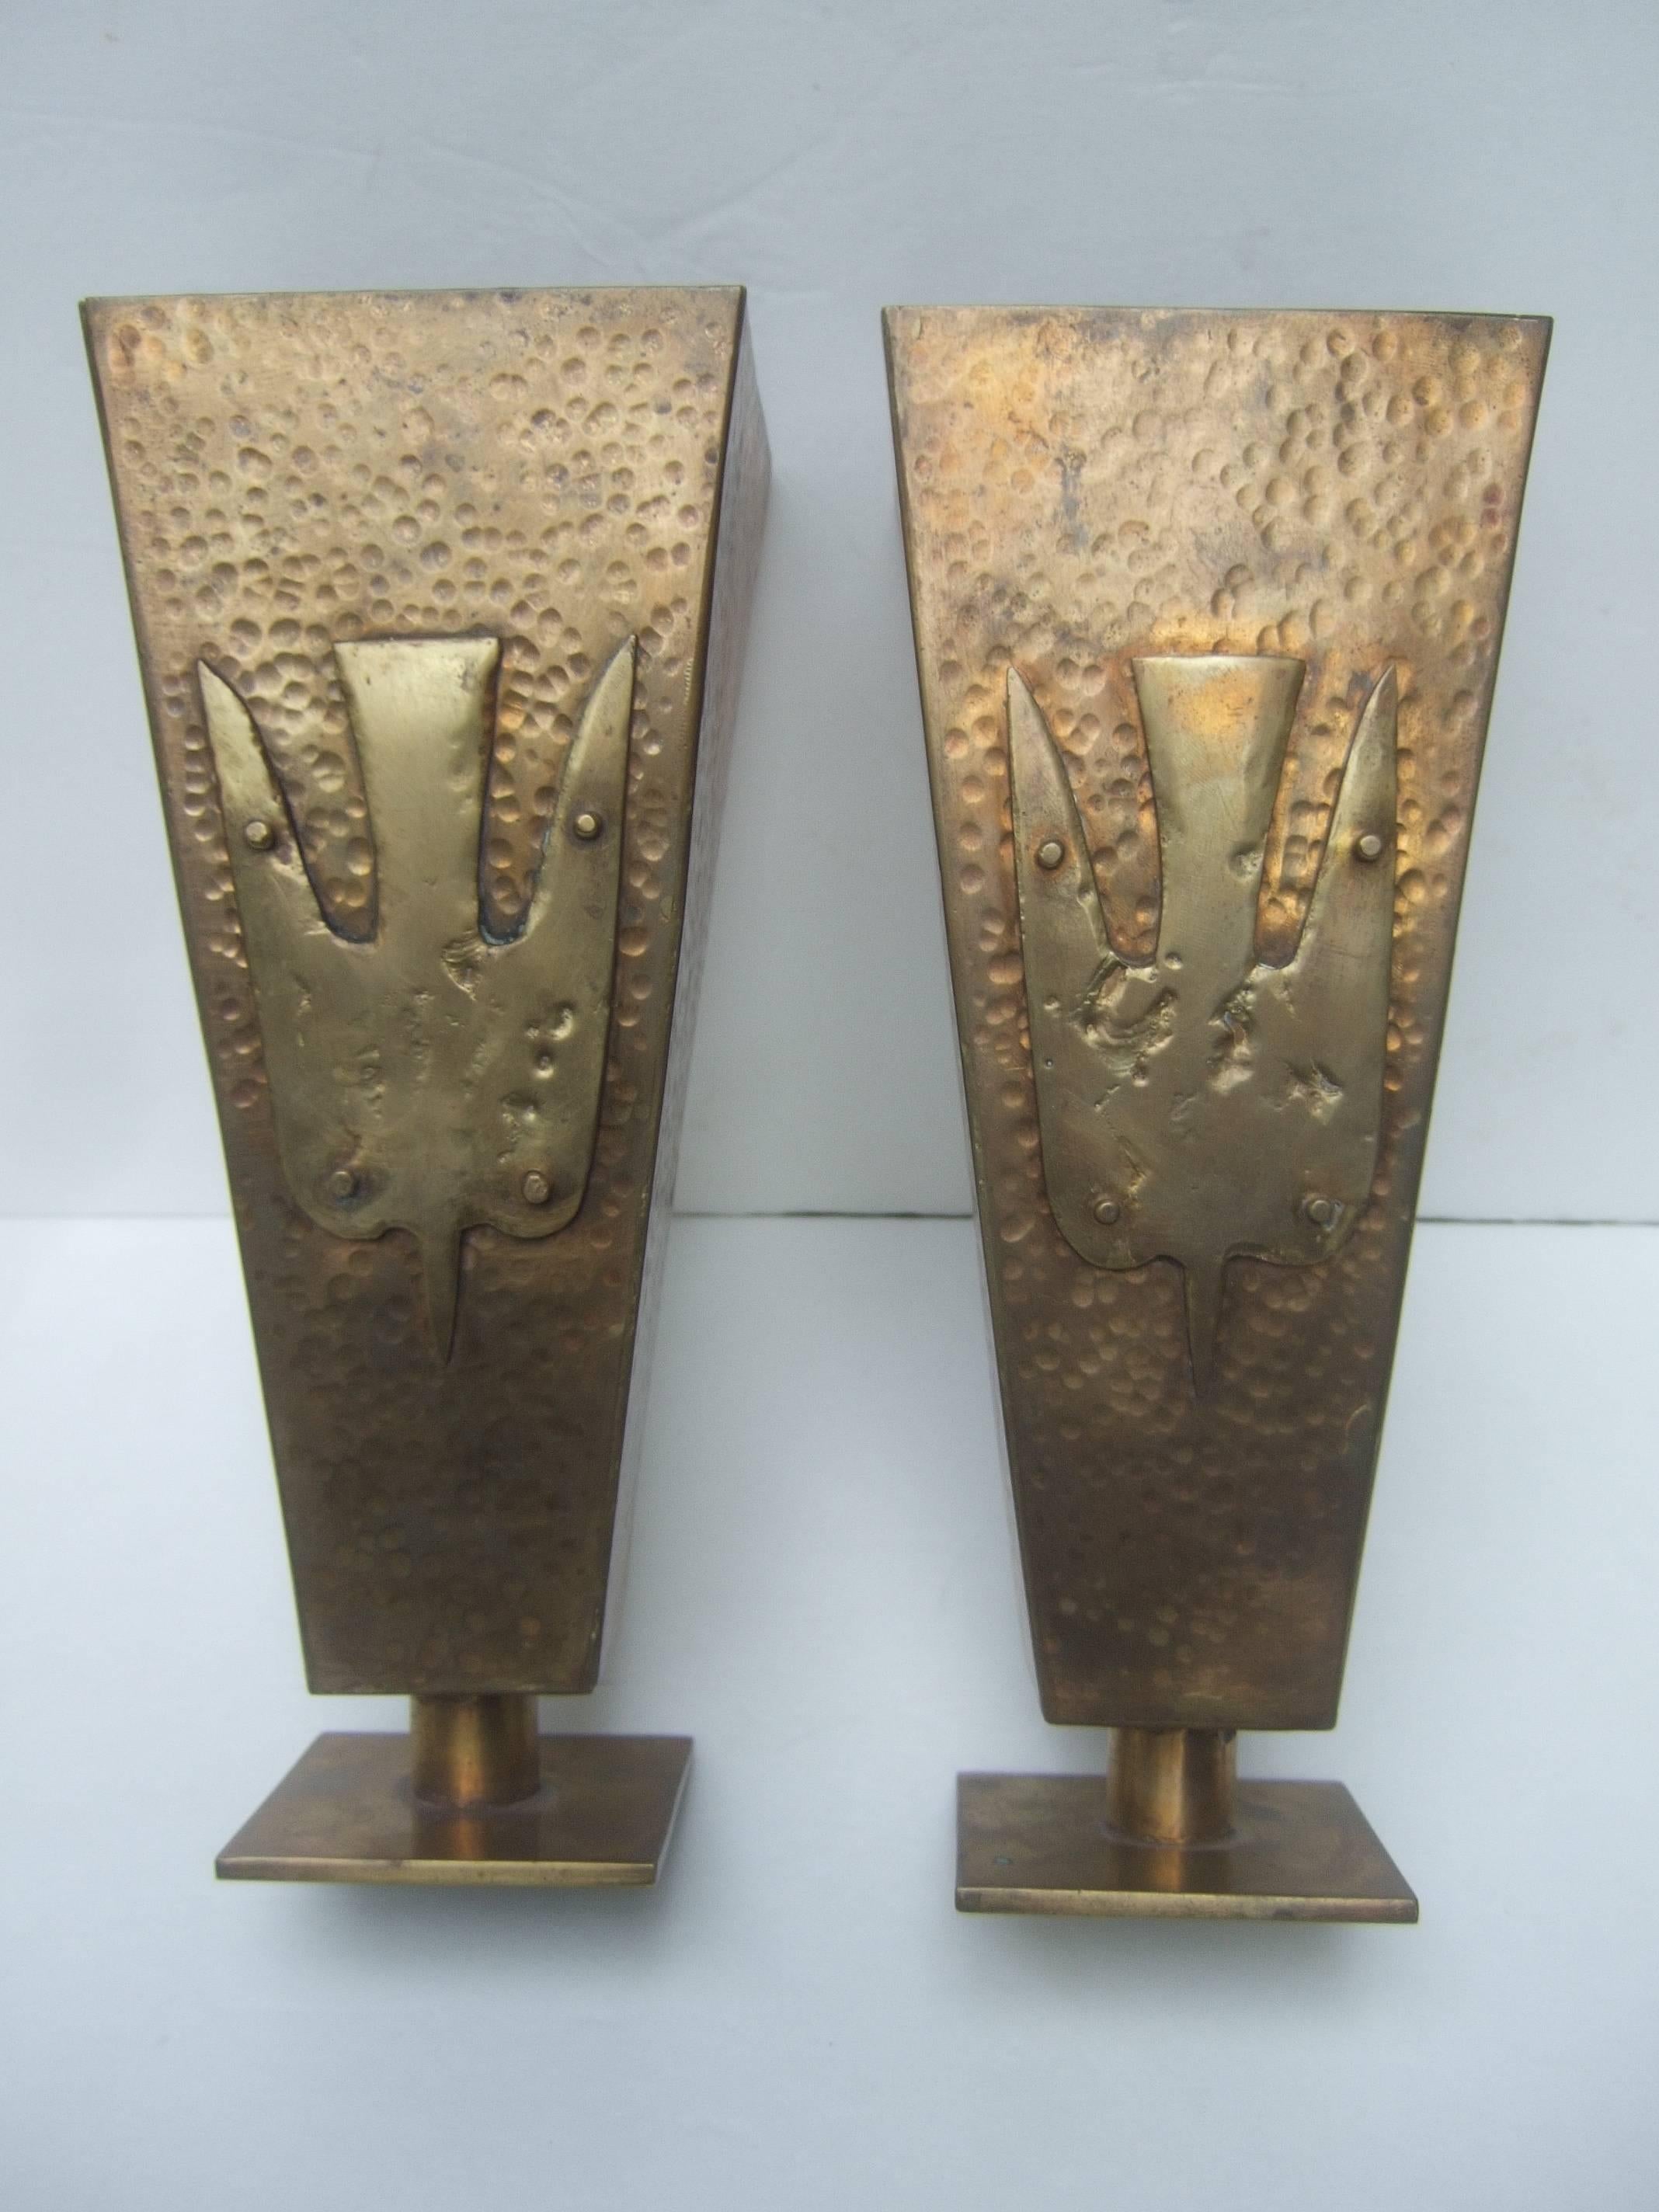 Brutalist pair of brass metal bird urns c. 1974
The artisan metal urns have a hammered 
textured finish on all four sides

In contrast the abstract cut metal plaques 
are reminiscent of Georges Braque's 
soaring birds in flight. Each urn is